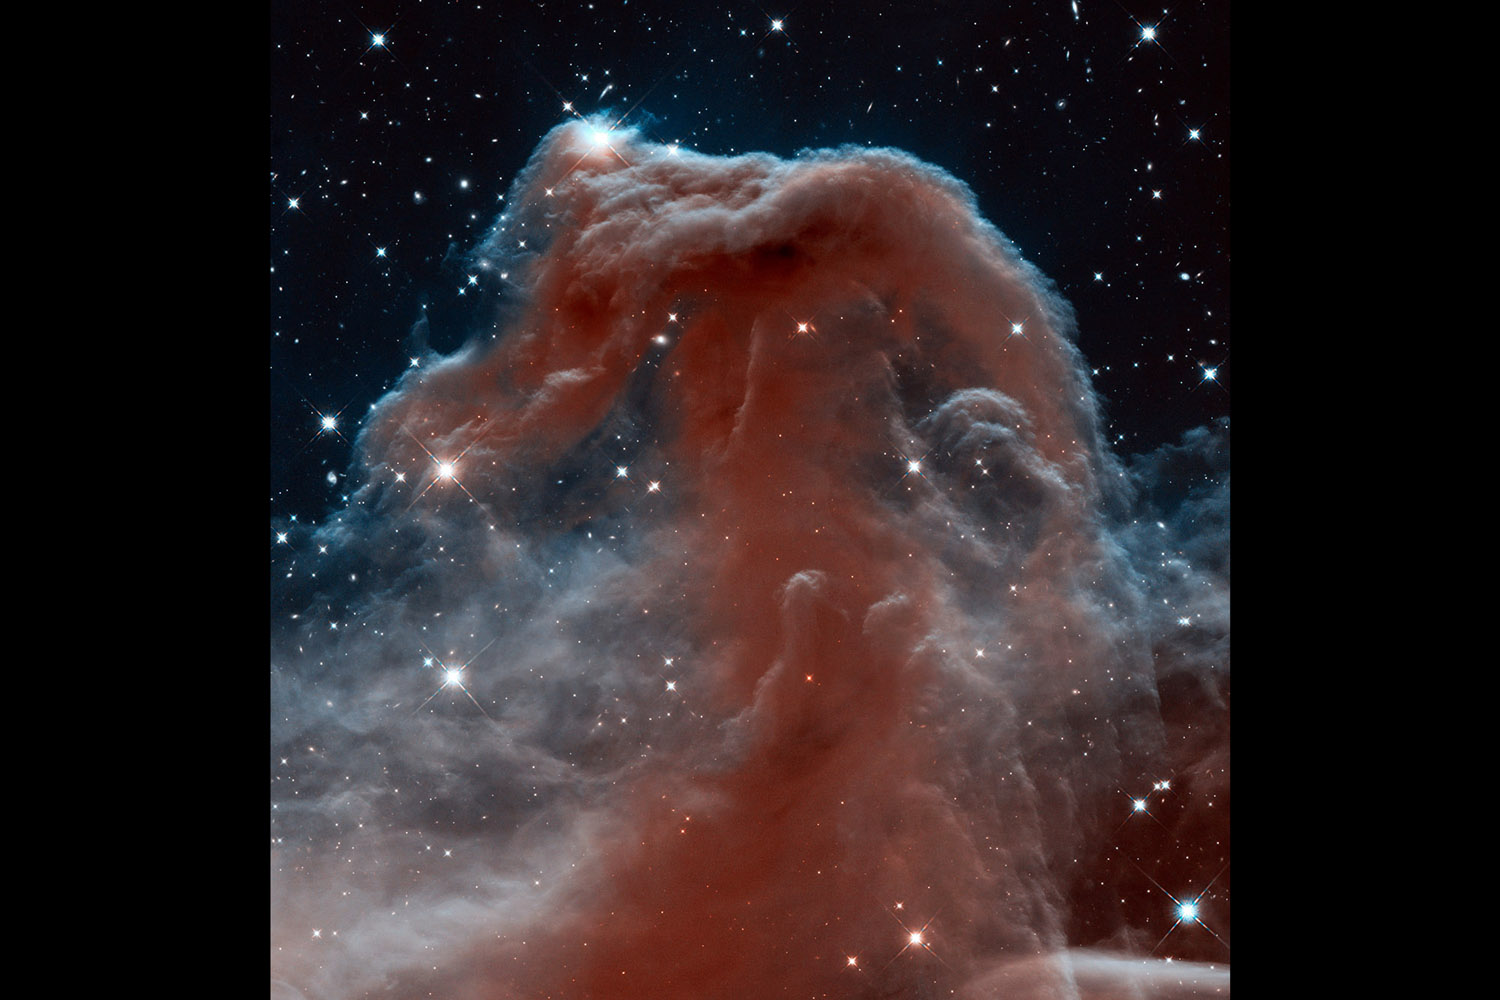 April 19, 2013. This new Hubble image, captured and released by the ESA-NASA Hubble Heritage to celebrate the telescope's 23 year in orbit, shows part of the sky in the constellation of Orion (The Hunter). Rising like a giant seahorse from turbulent waves of dust and gas is the Horsehead Nebula, otherwise known as Barnard 33.